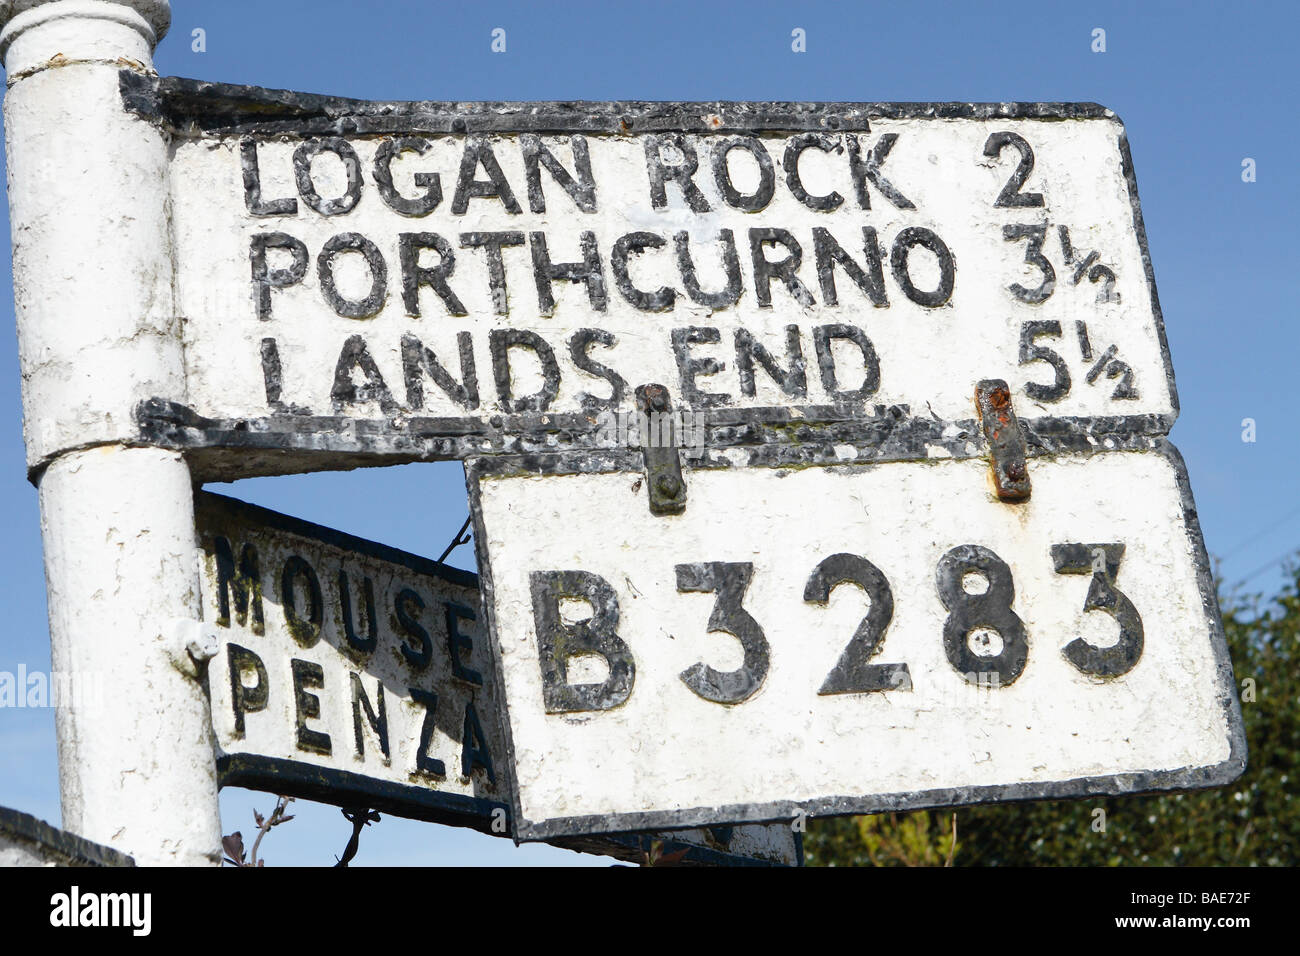 Cornwall old road sign pointing to Lands End Portchurno and Logan Rock along the B3283 Stock Photo